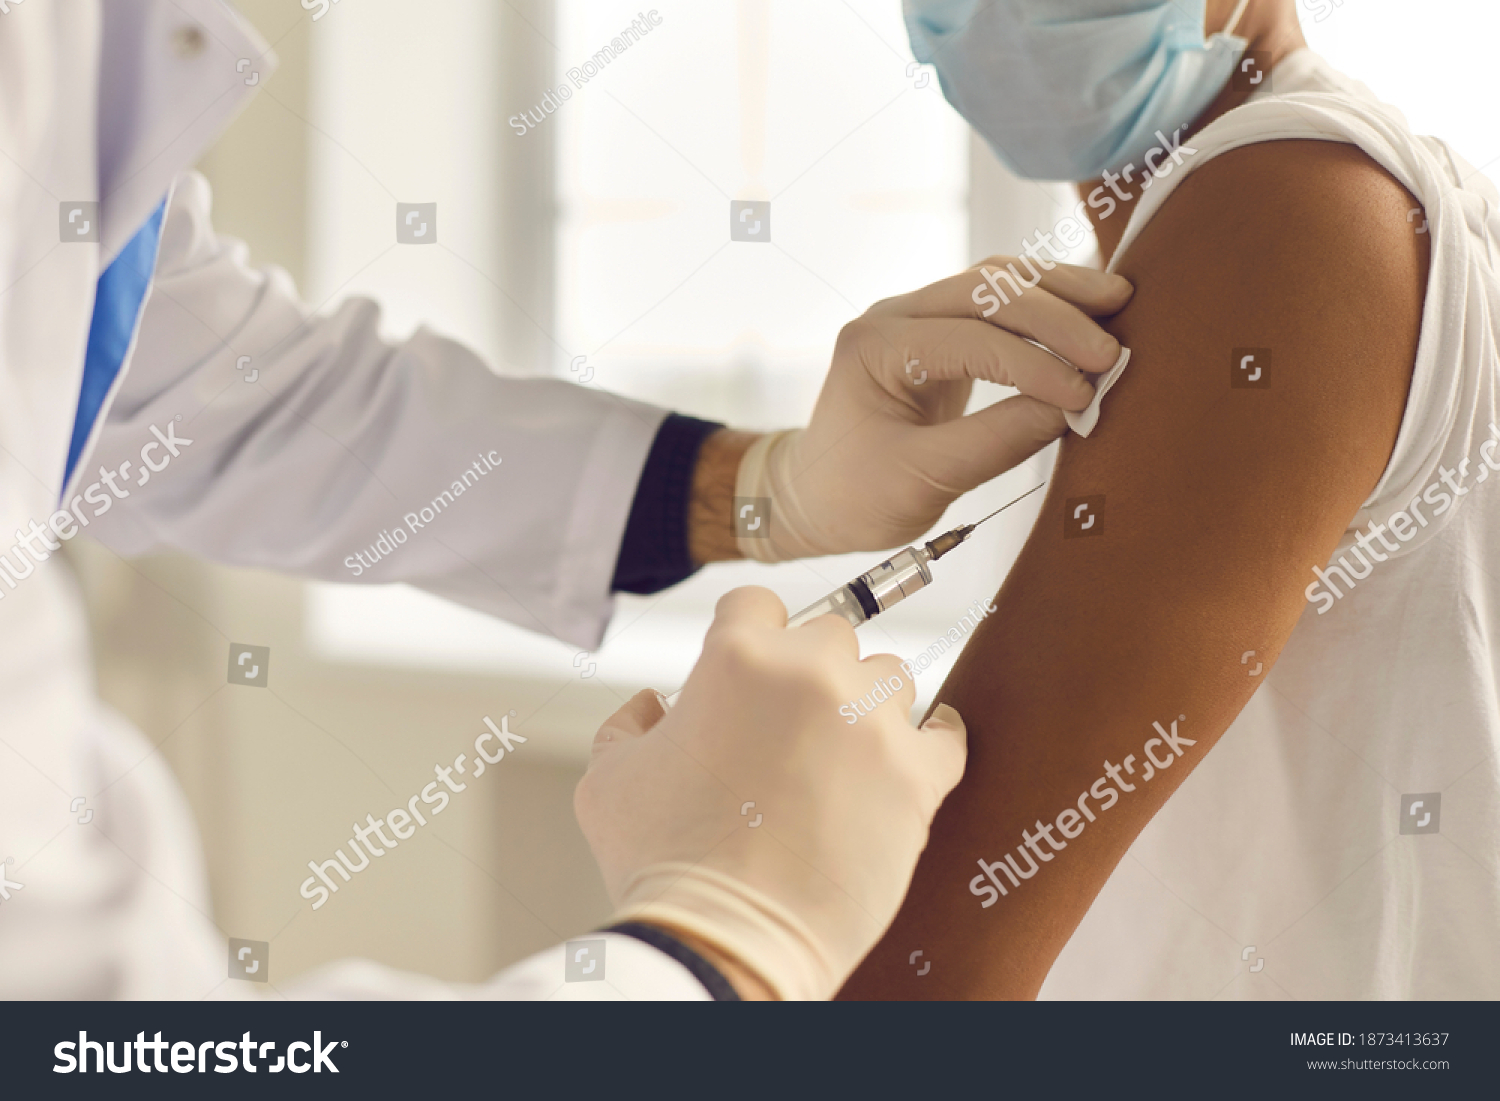 Doctor in medical gloves giving Covid-19, AIDS or flu antivirus vaccine shot to African-American patient. Close-up of hands holding syringe and cleaning skin on upper arm before antiviral injection #1873413637